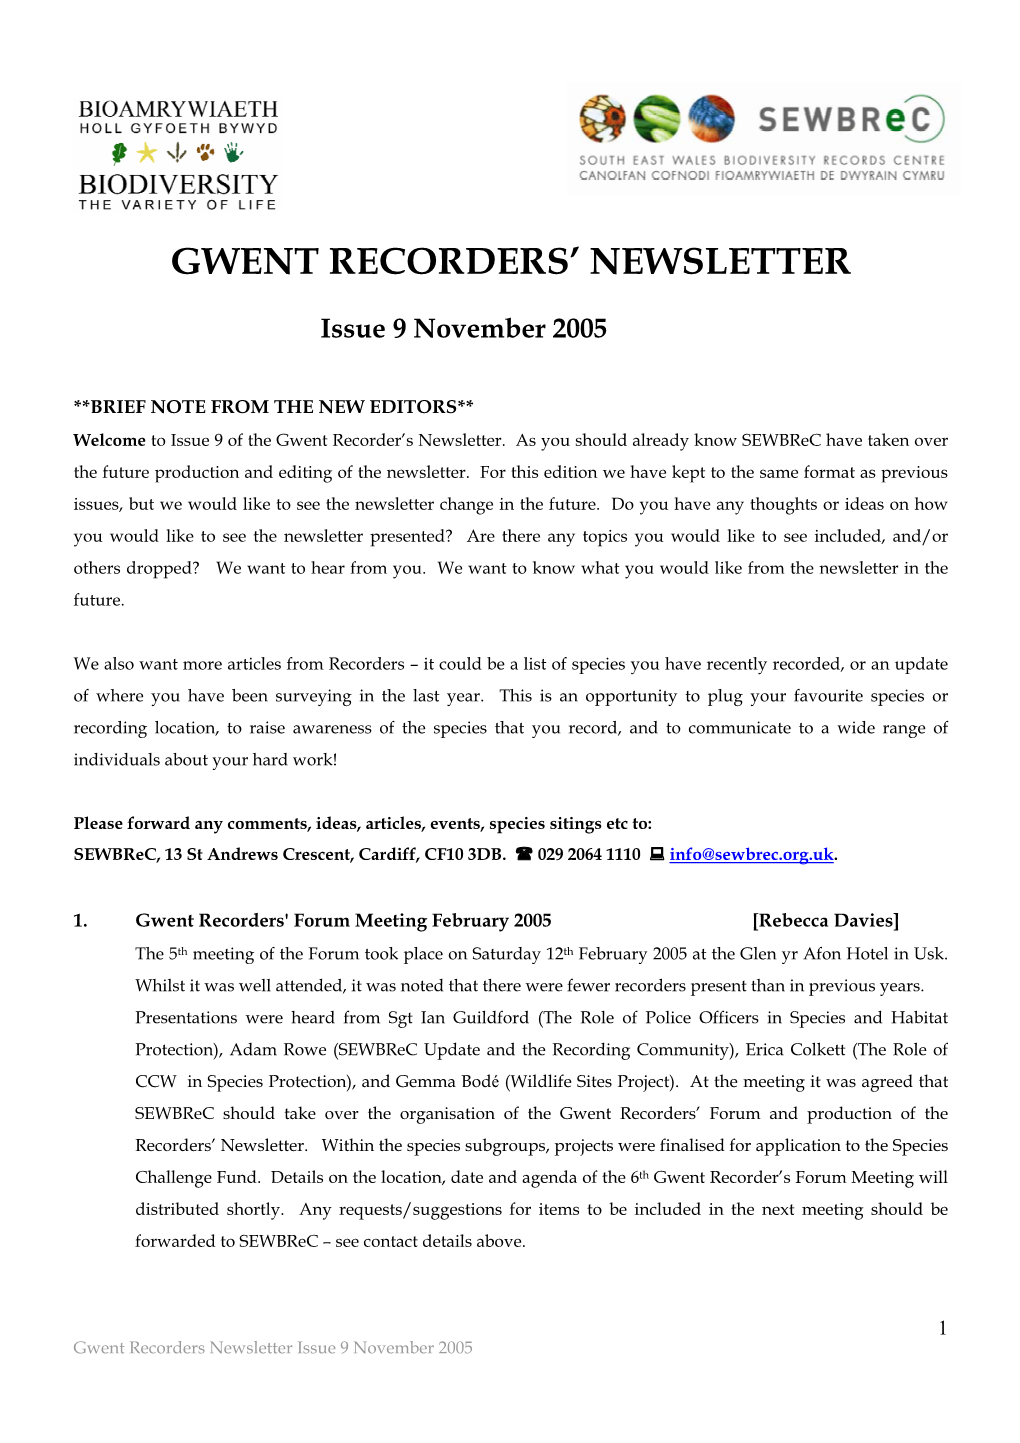 Gwent Recorders' Newsletter No. 09